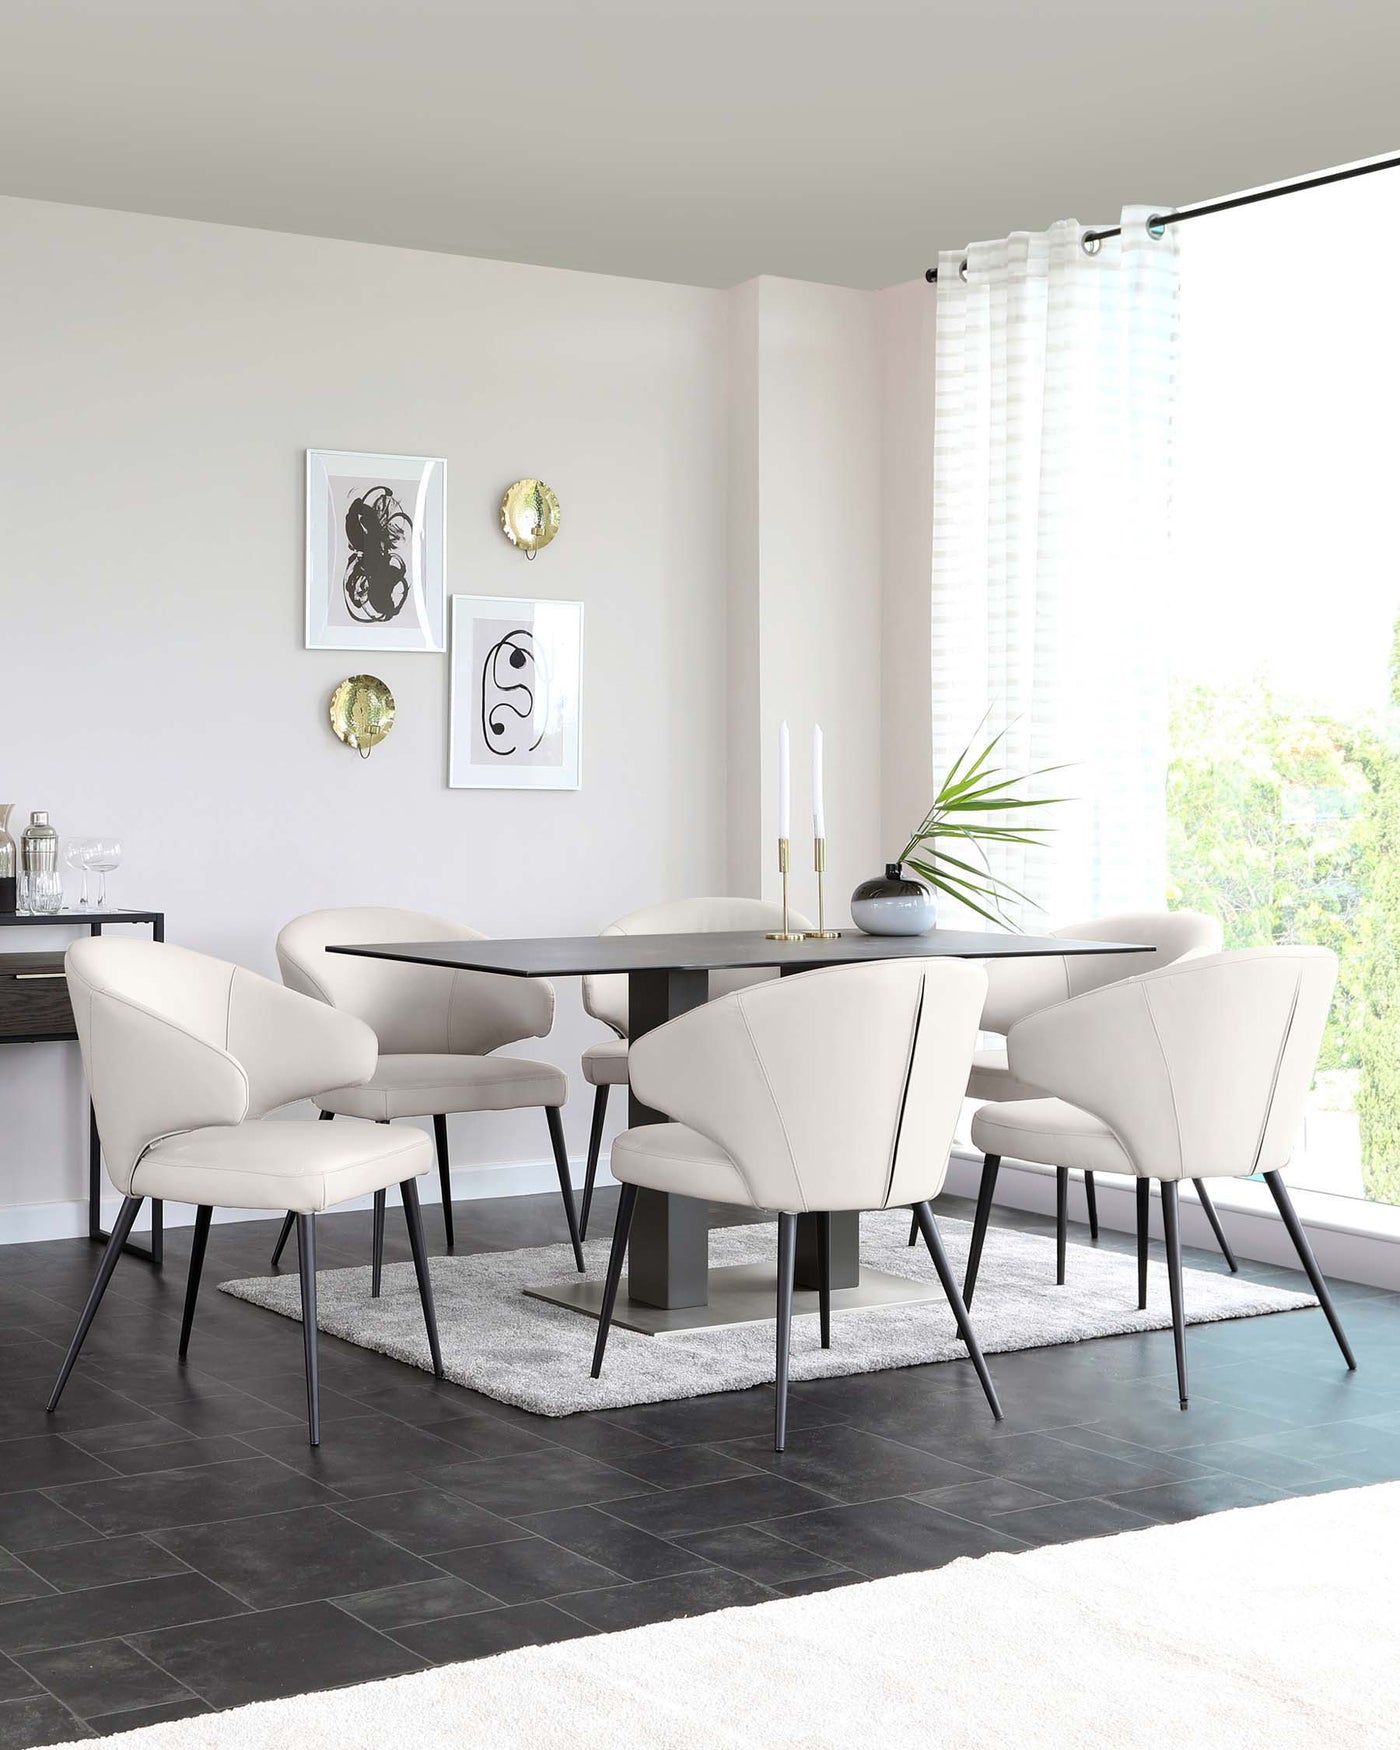 Modern dining room furniture set featuring an oval-shaped table with a matte black tabletop and a dark, sturdy base. Accompanied by four elegant, curved-back chairs upholstered in a light beige fabric with contrasting black metal legs. A plush white rug underlays the setup on a dark tiled floor.